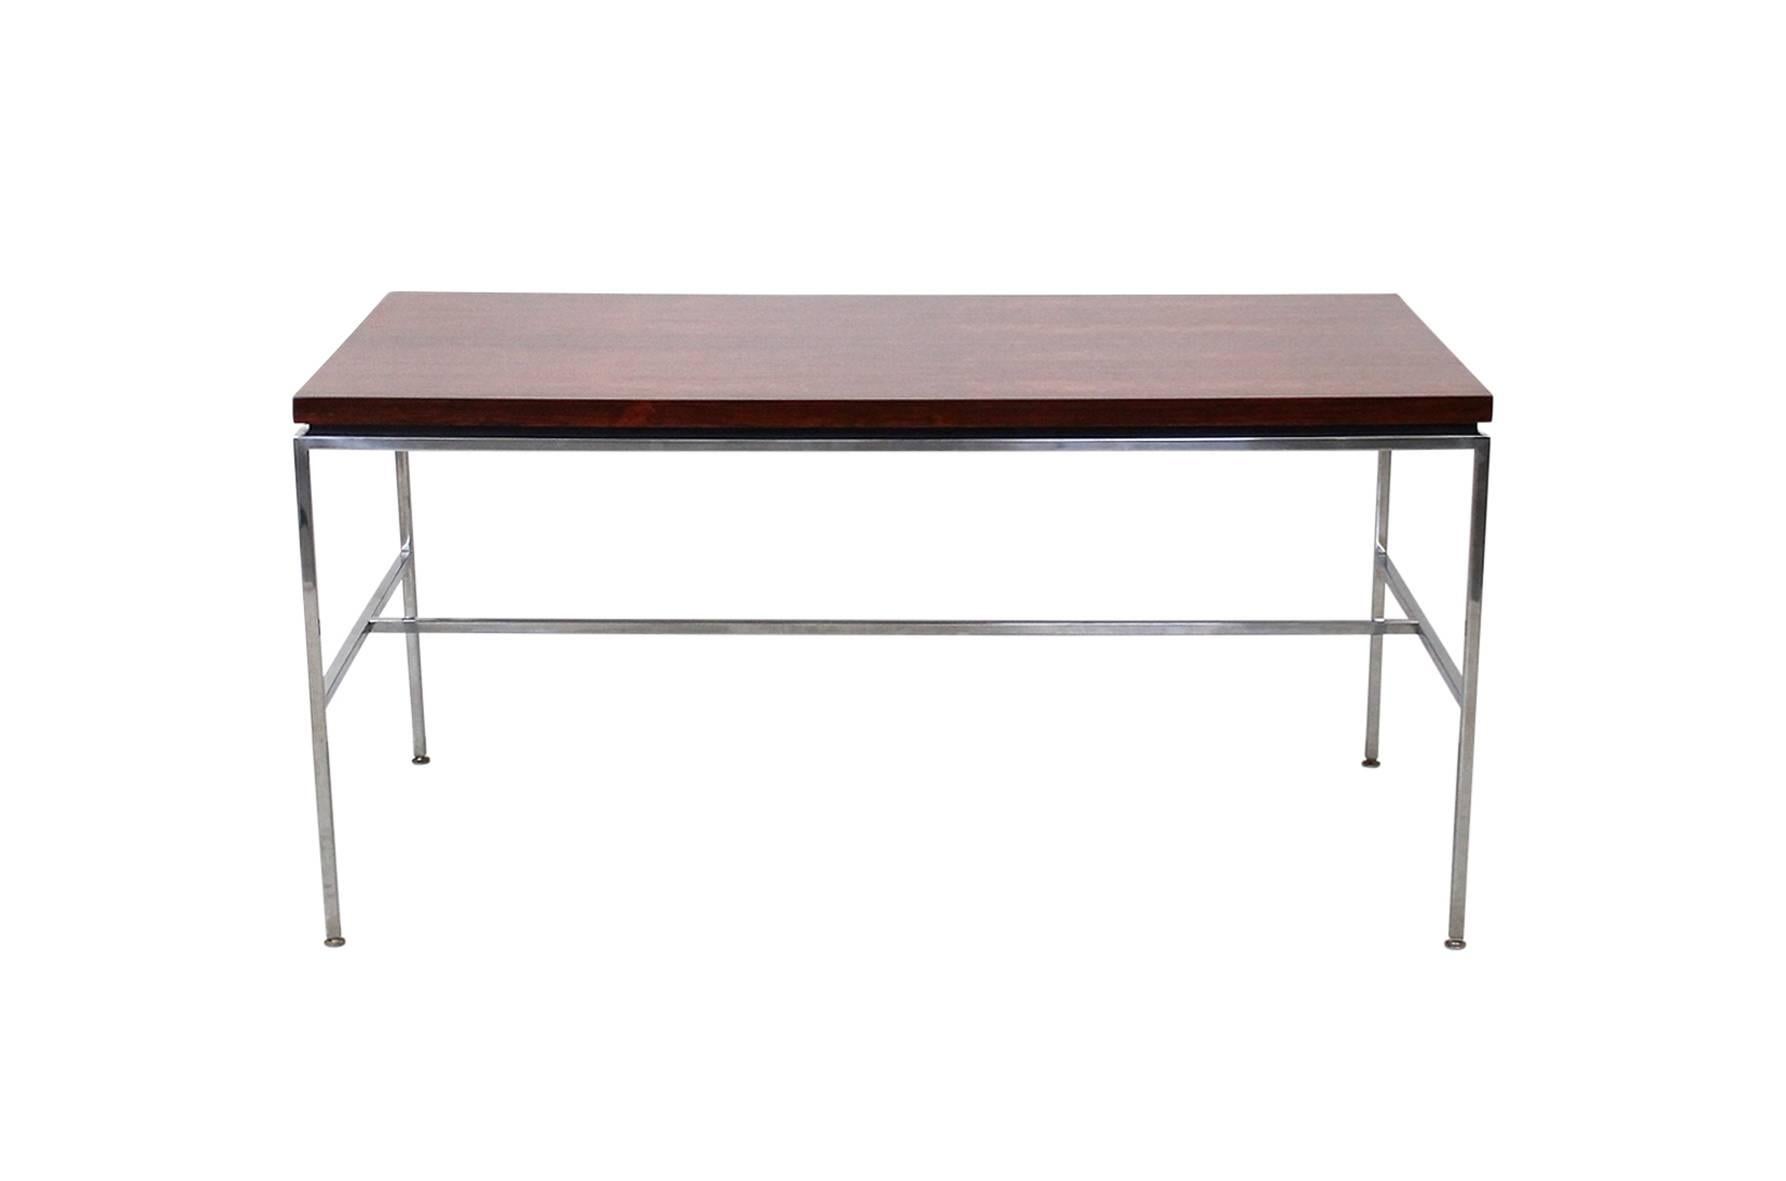 Minimalist desk by Drexel. This seldom seen design by the American company features a floating exotic wood top over steel base. Suitable as a writing desk or work table.